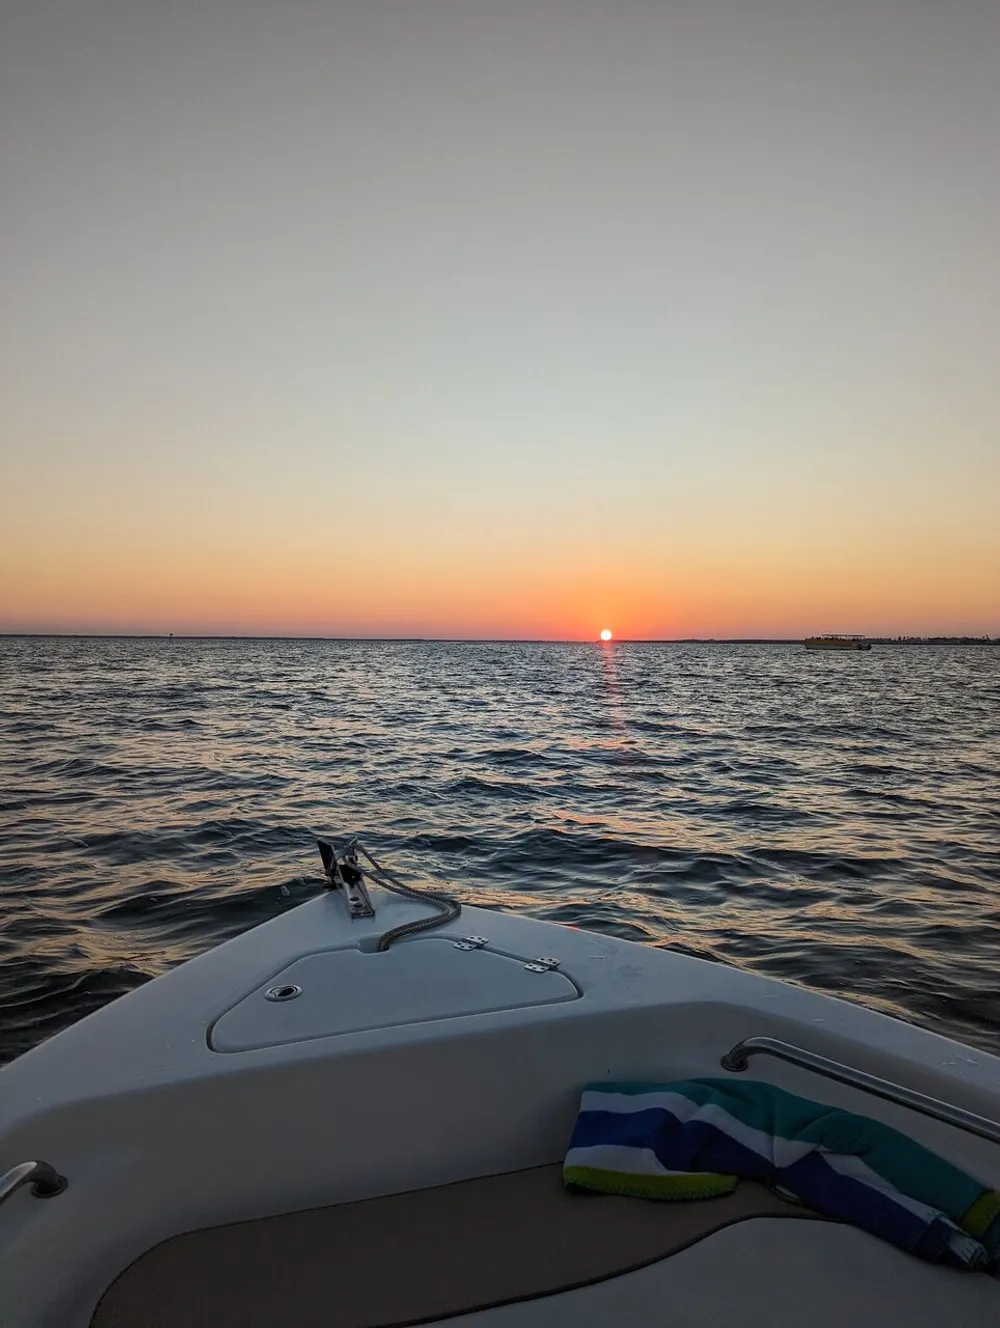 A serene view of a sunset from the bow of a boat floating on calm waters